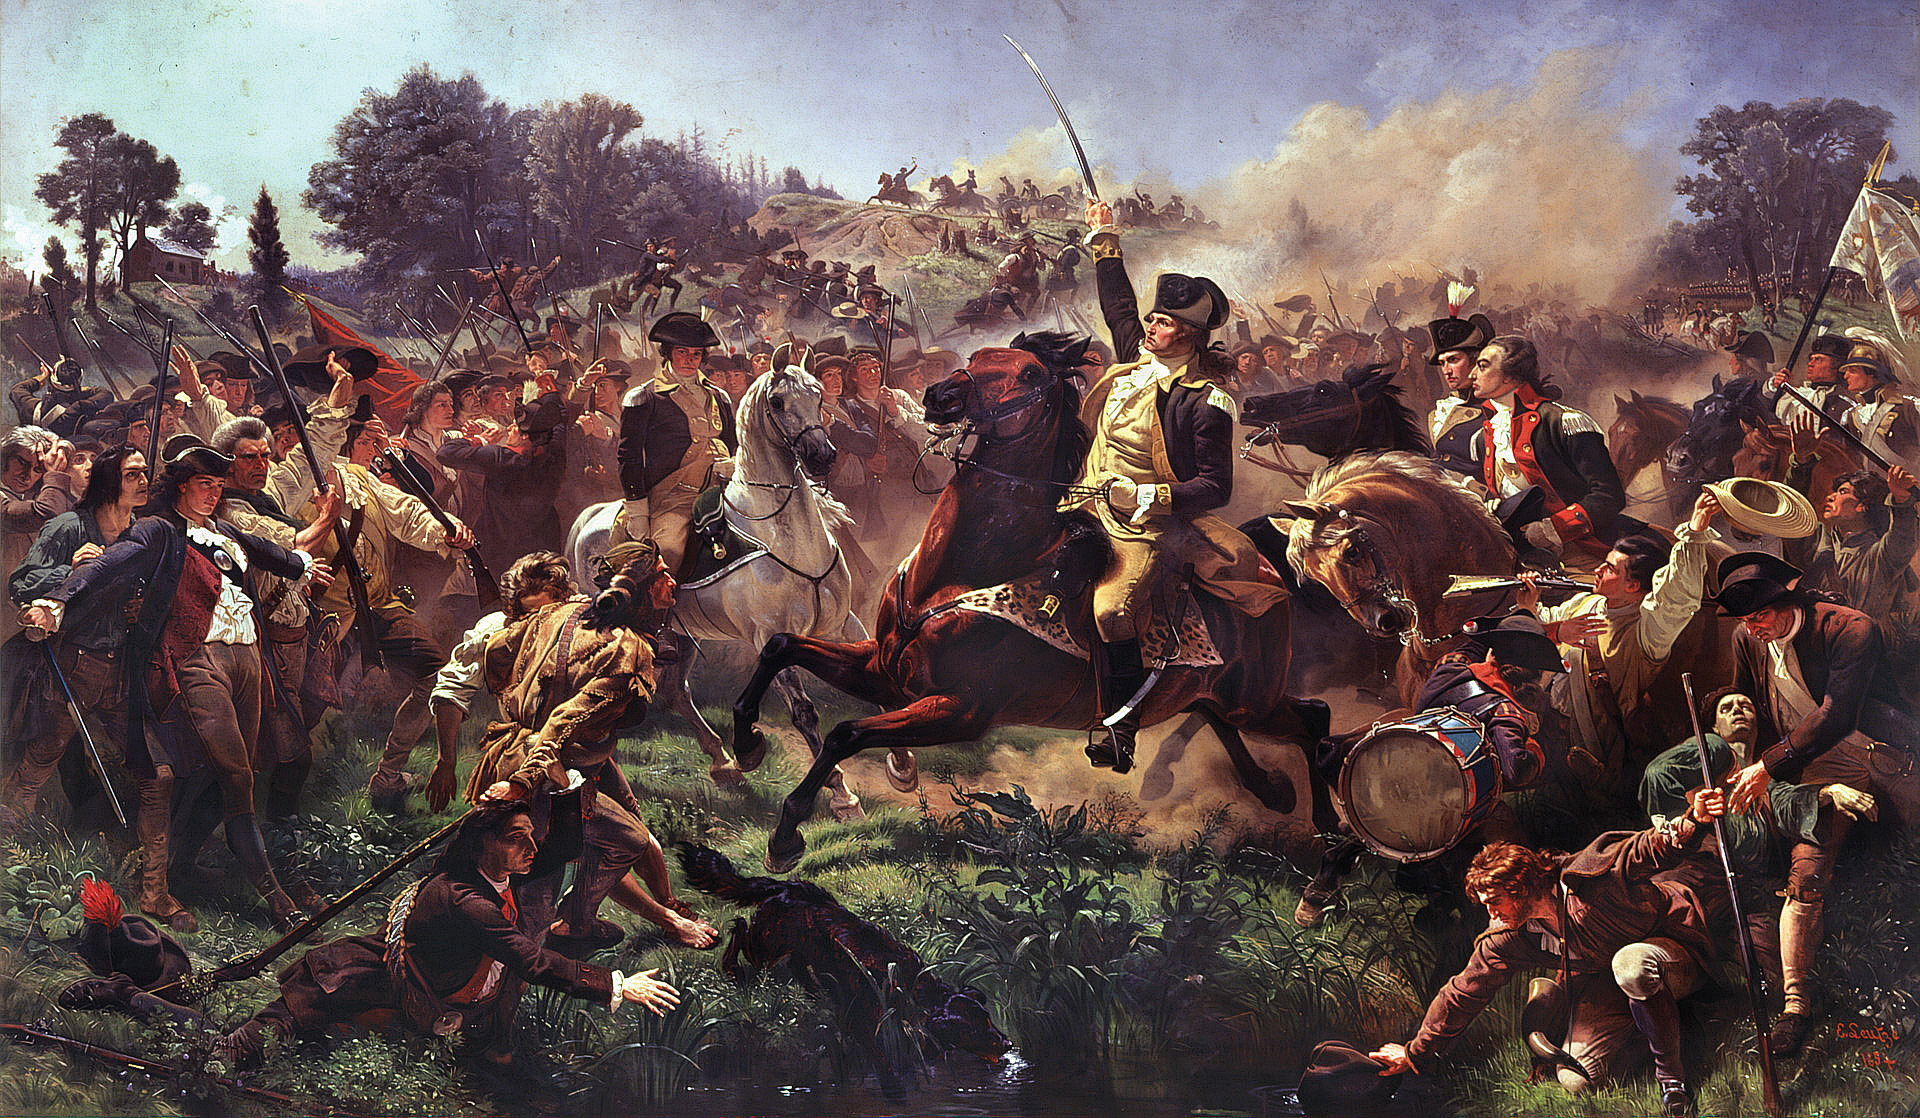 General George Washington rallies his Continental Army during the Battle of Monmouth in June 1778 in a 19th-century painting by Emanuel Leutze. Maj. Gen. Friedrich Wilhelm von Steuben’s relentless drilling of Washington’s soldiers at Valley Forge the previous winter enabled them to fight the British Army to a draw that day.